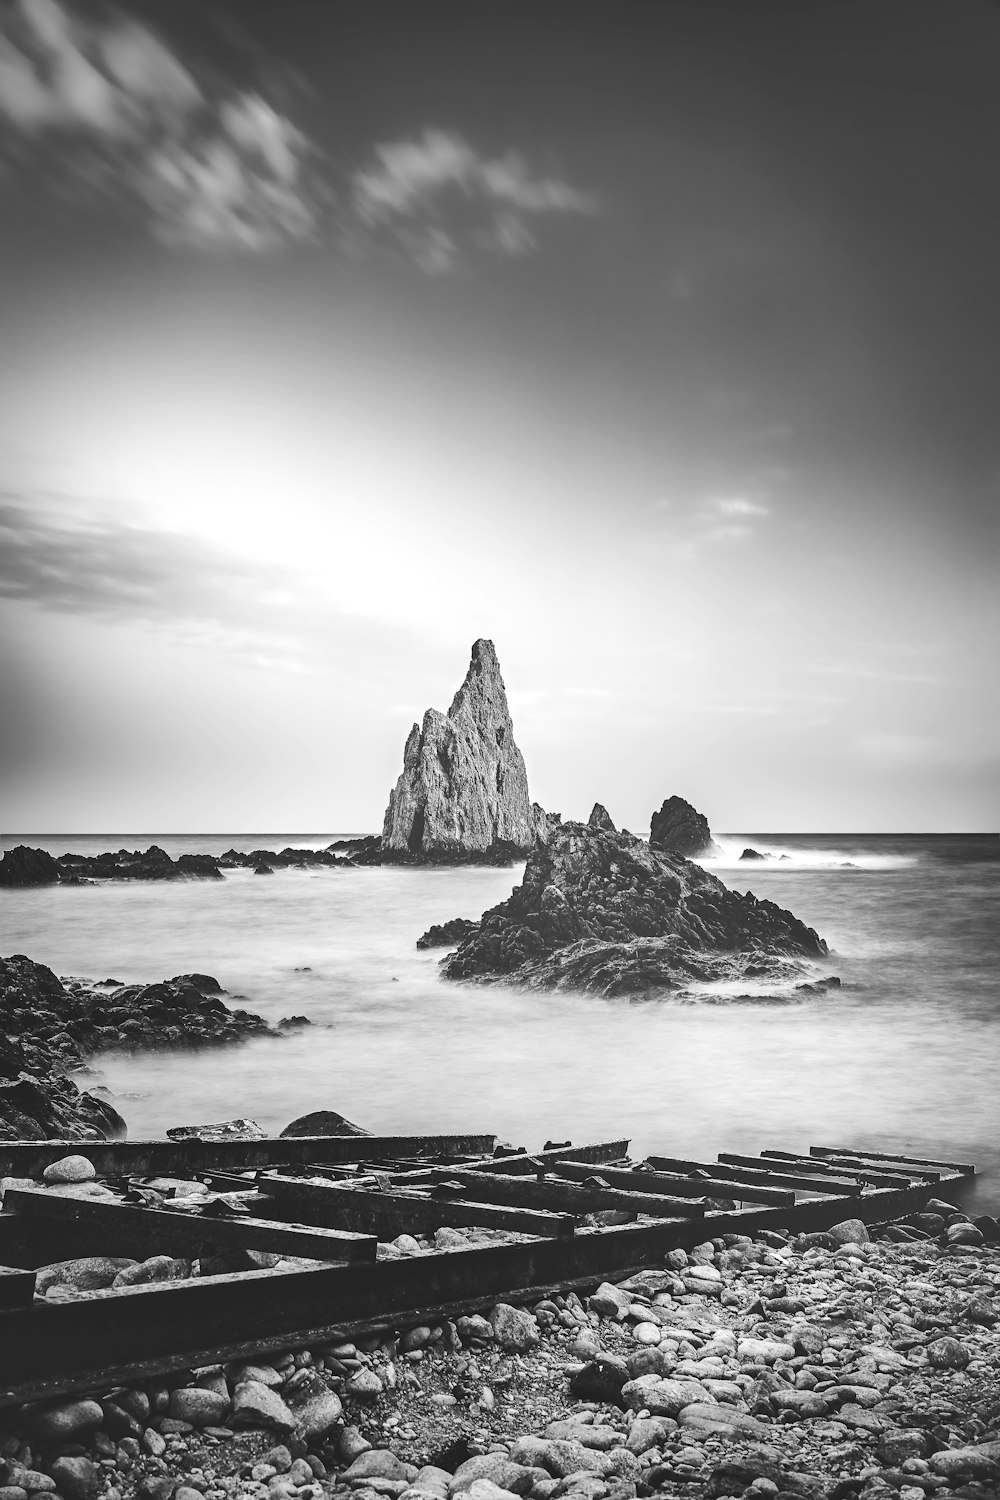 a black and white photo of a rocky beach